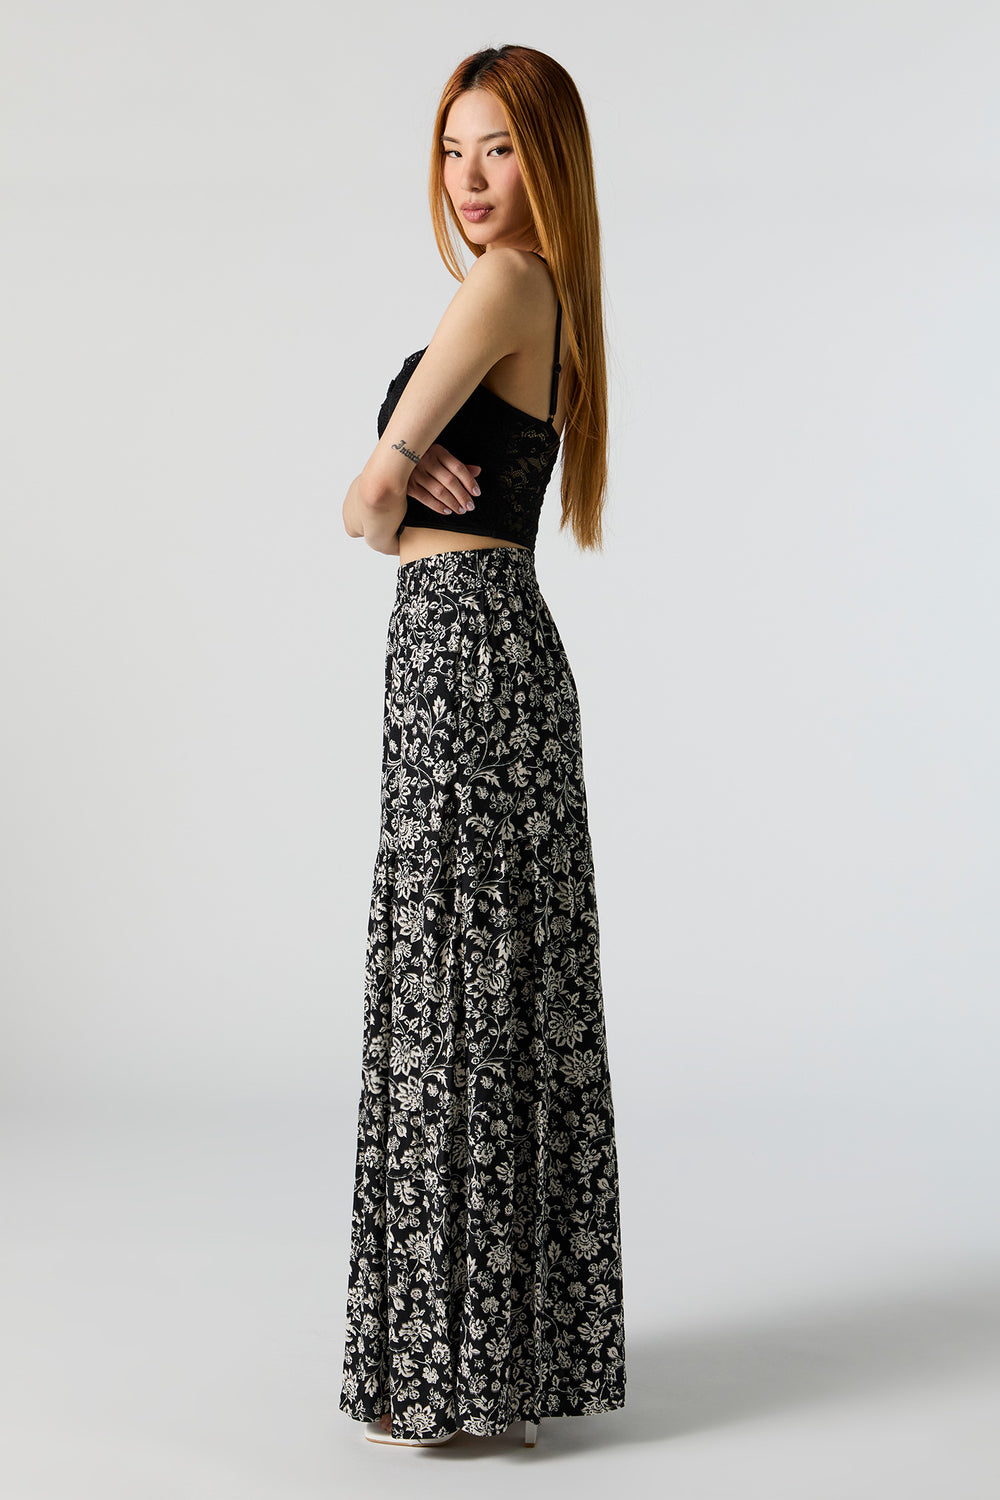 Black Floral High Rise Tiered Maxi Skirt Black Floral High Rise Tiered Maxi Skirt 2